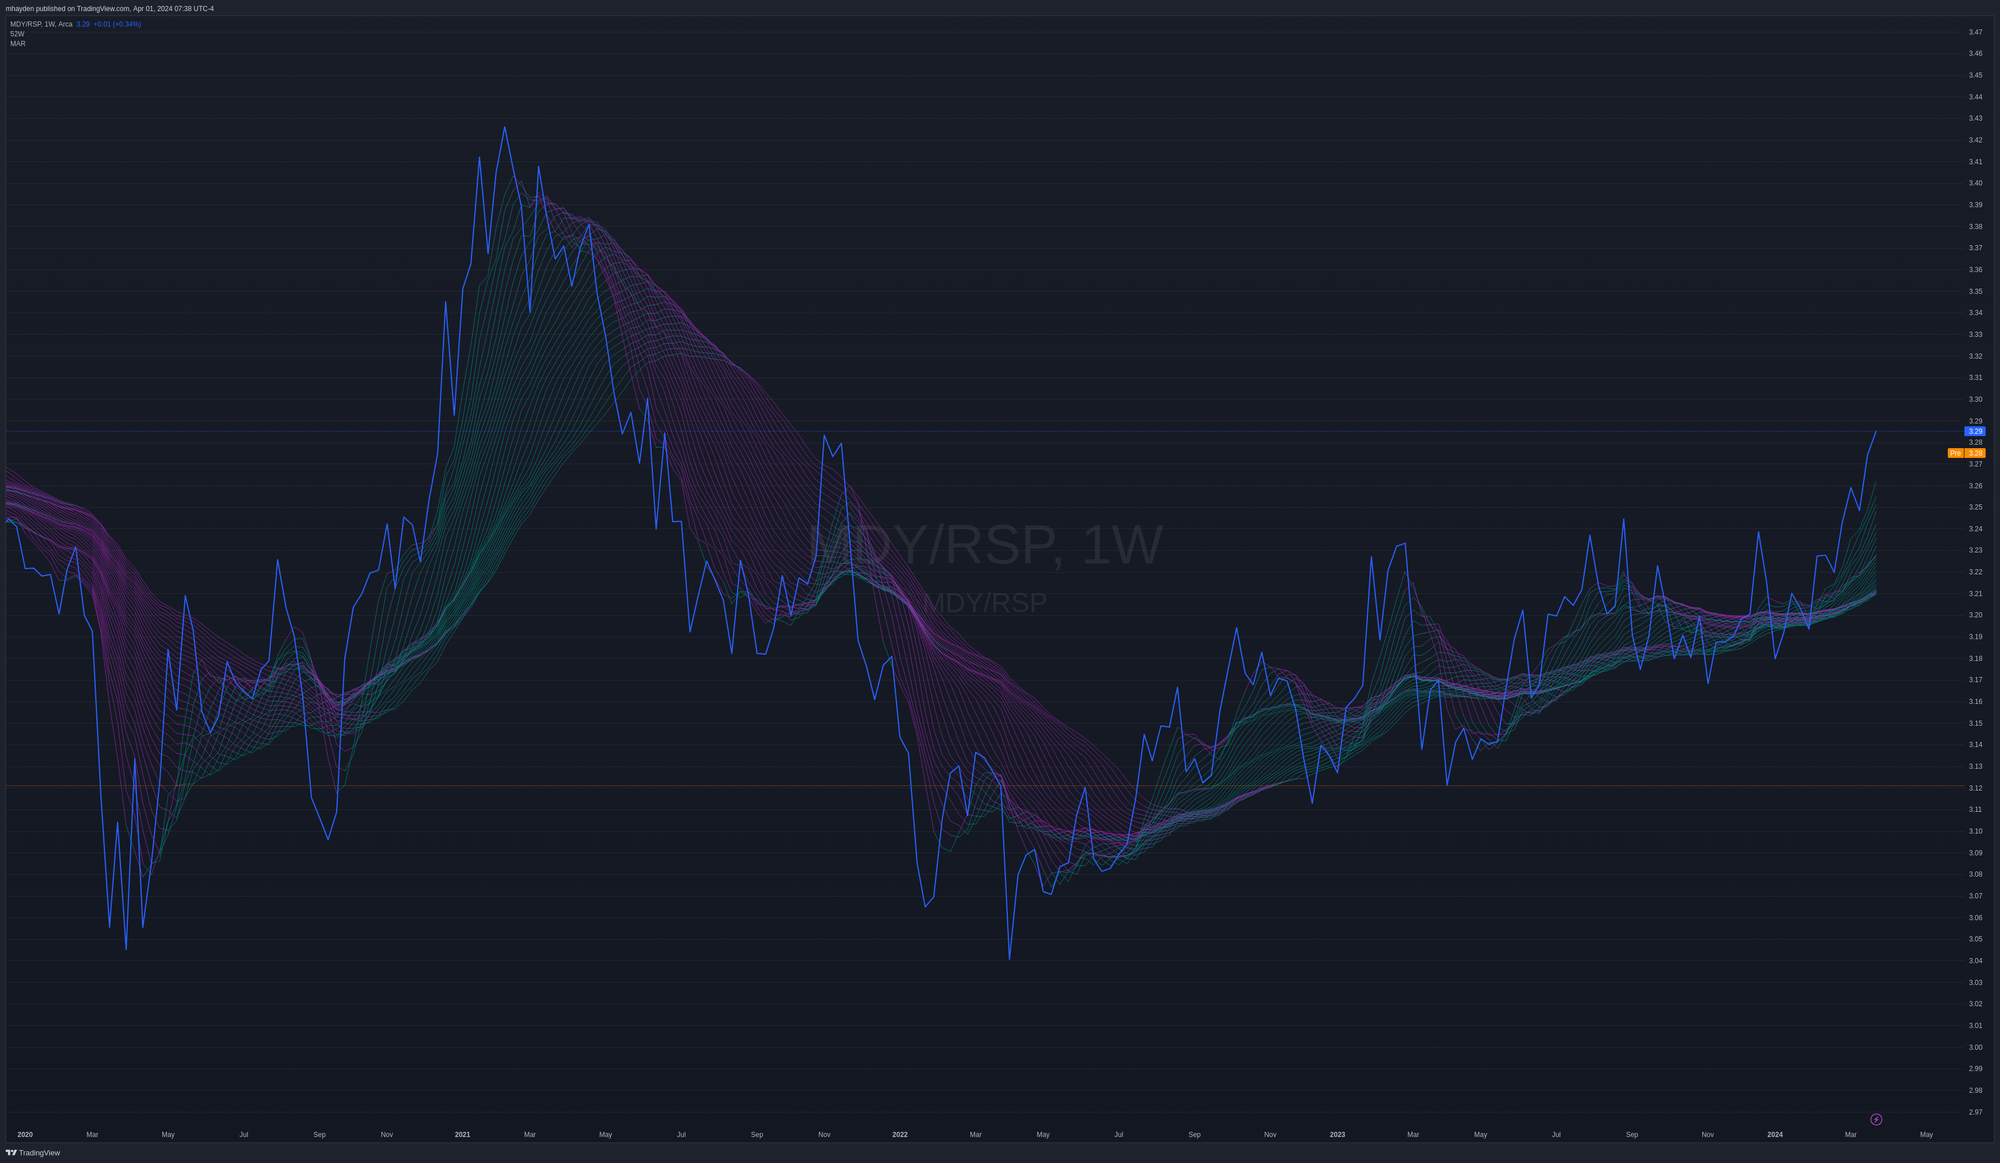 MDY/RSP weekly since COVID lows